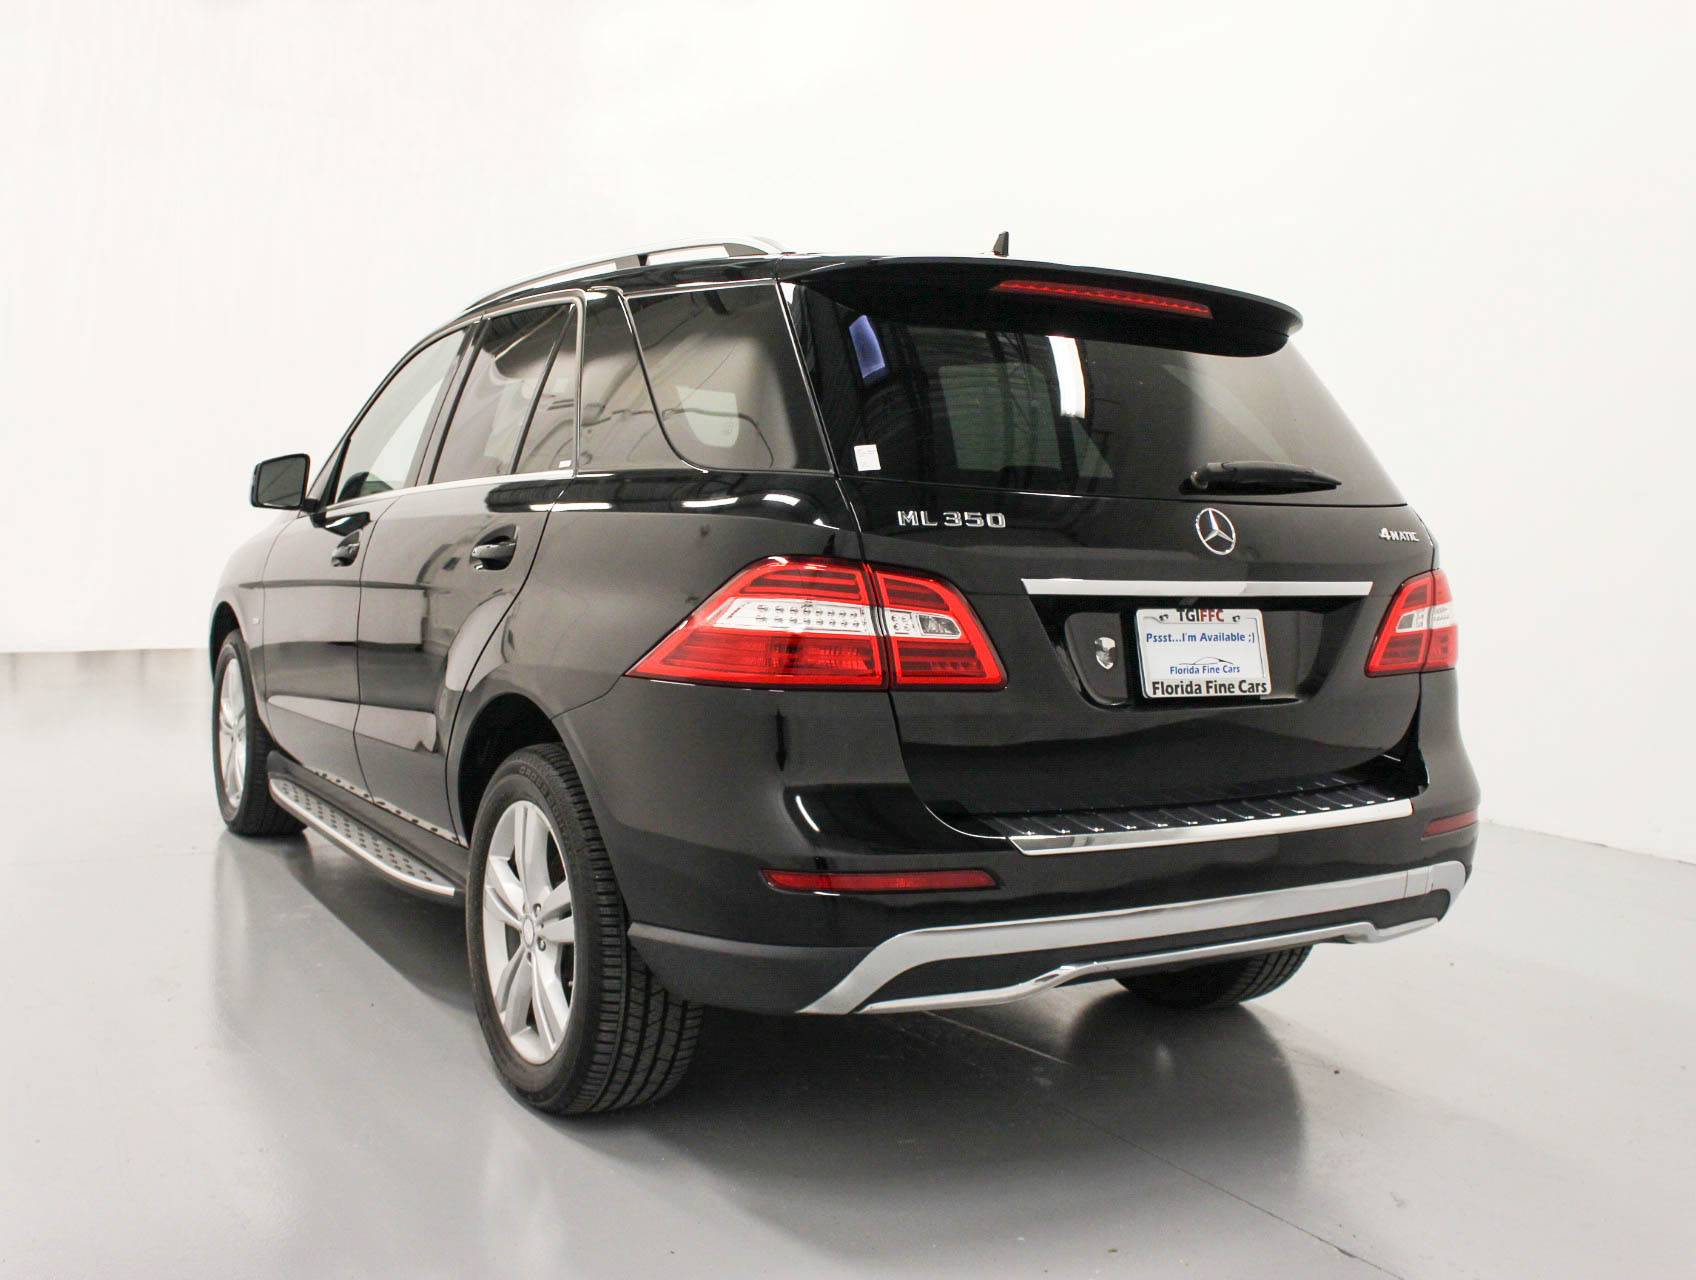 Used 2012 Mercedes Benz M Class Ml350 4matic Suv For Sale In